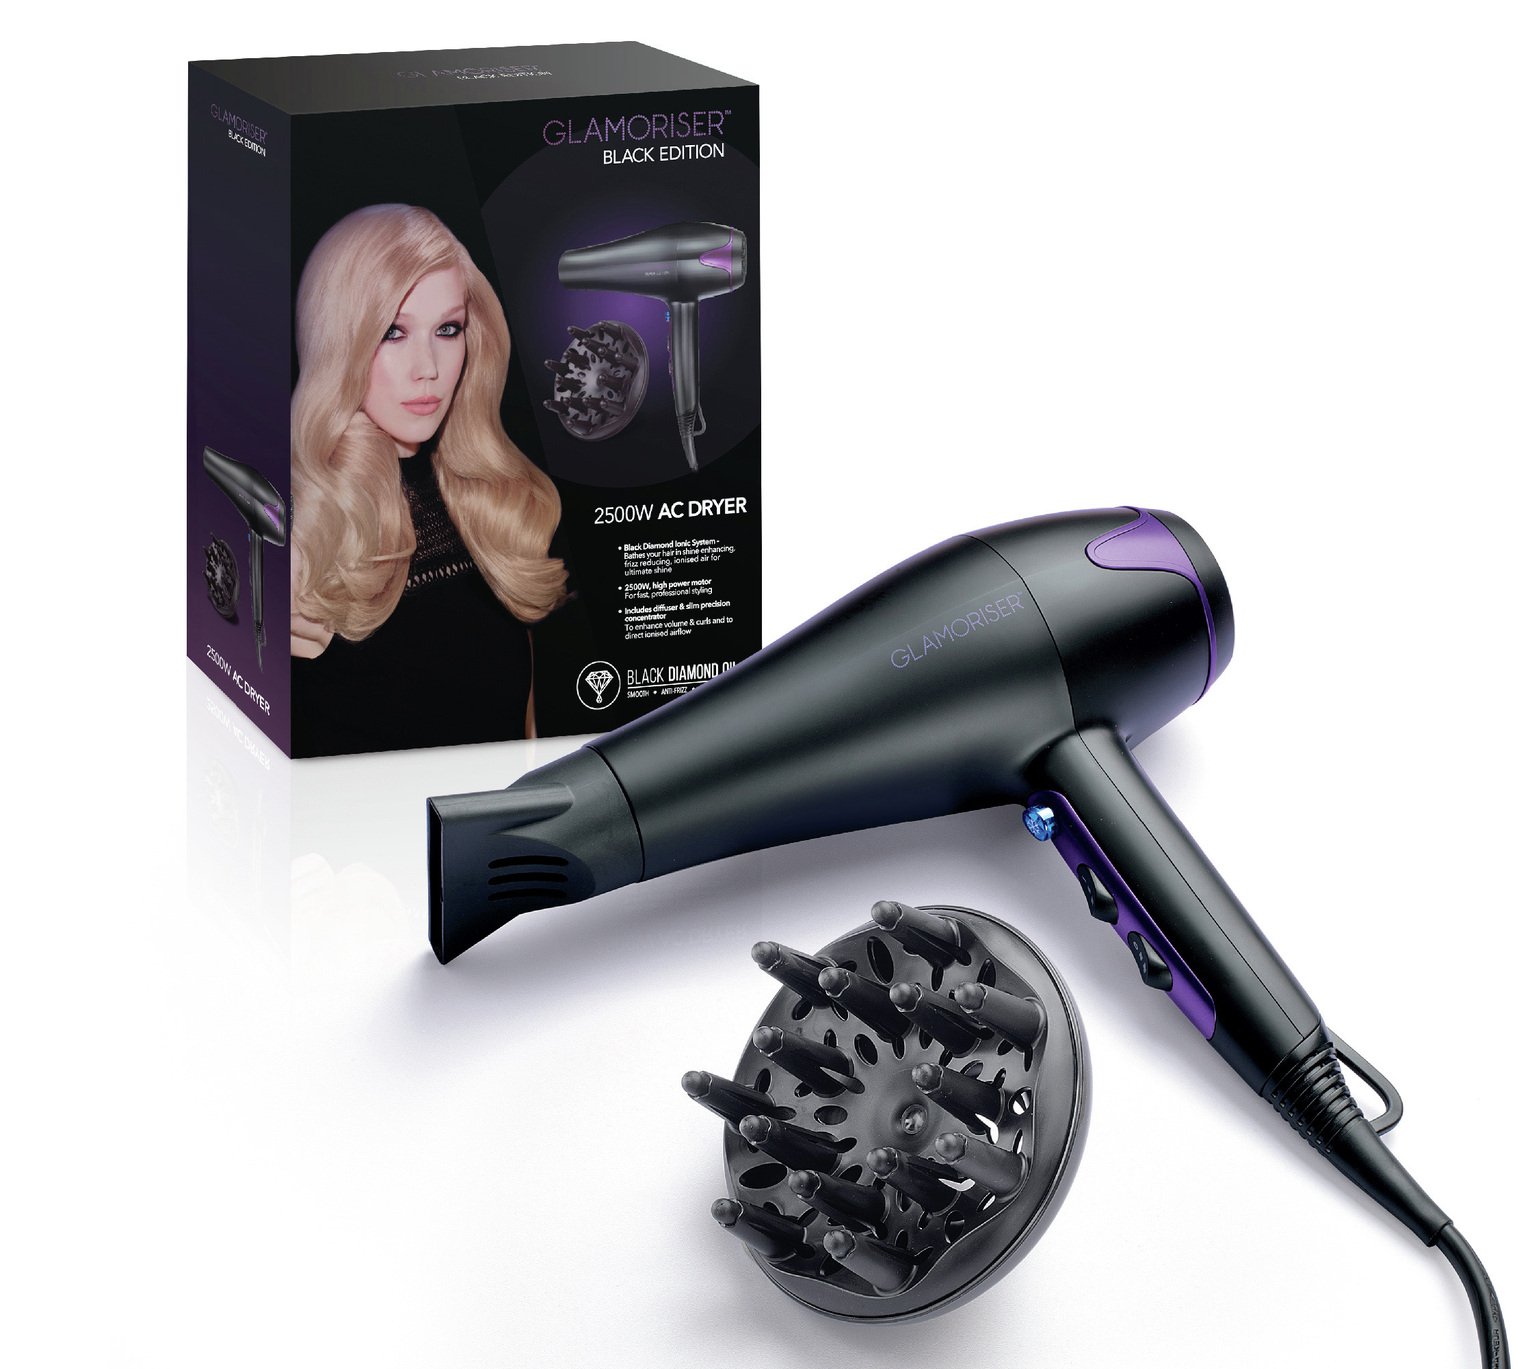 Glamoriser Black Edition Hair Dryer with Diffuser review